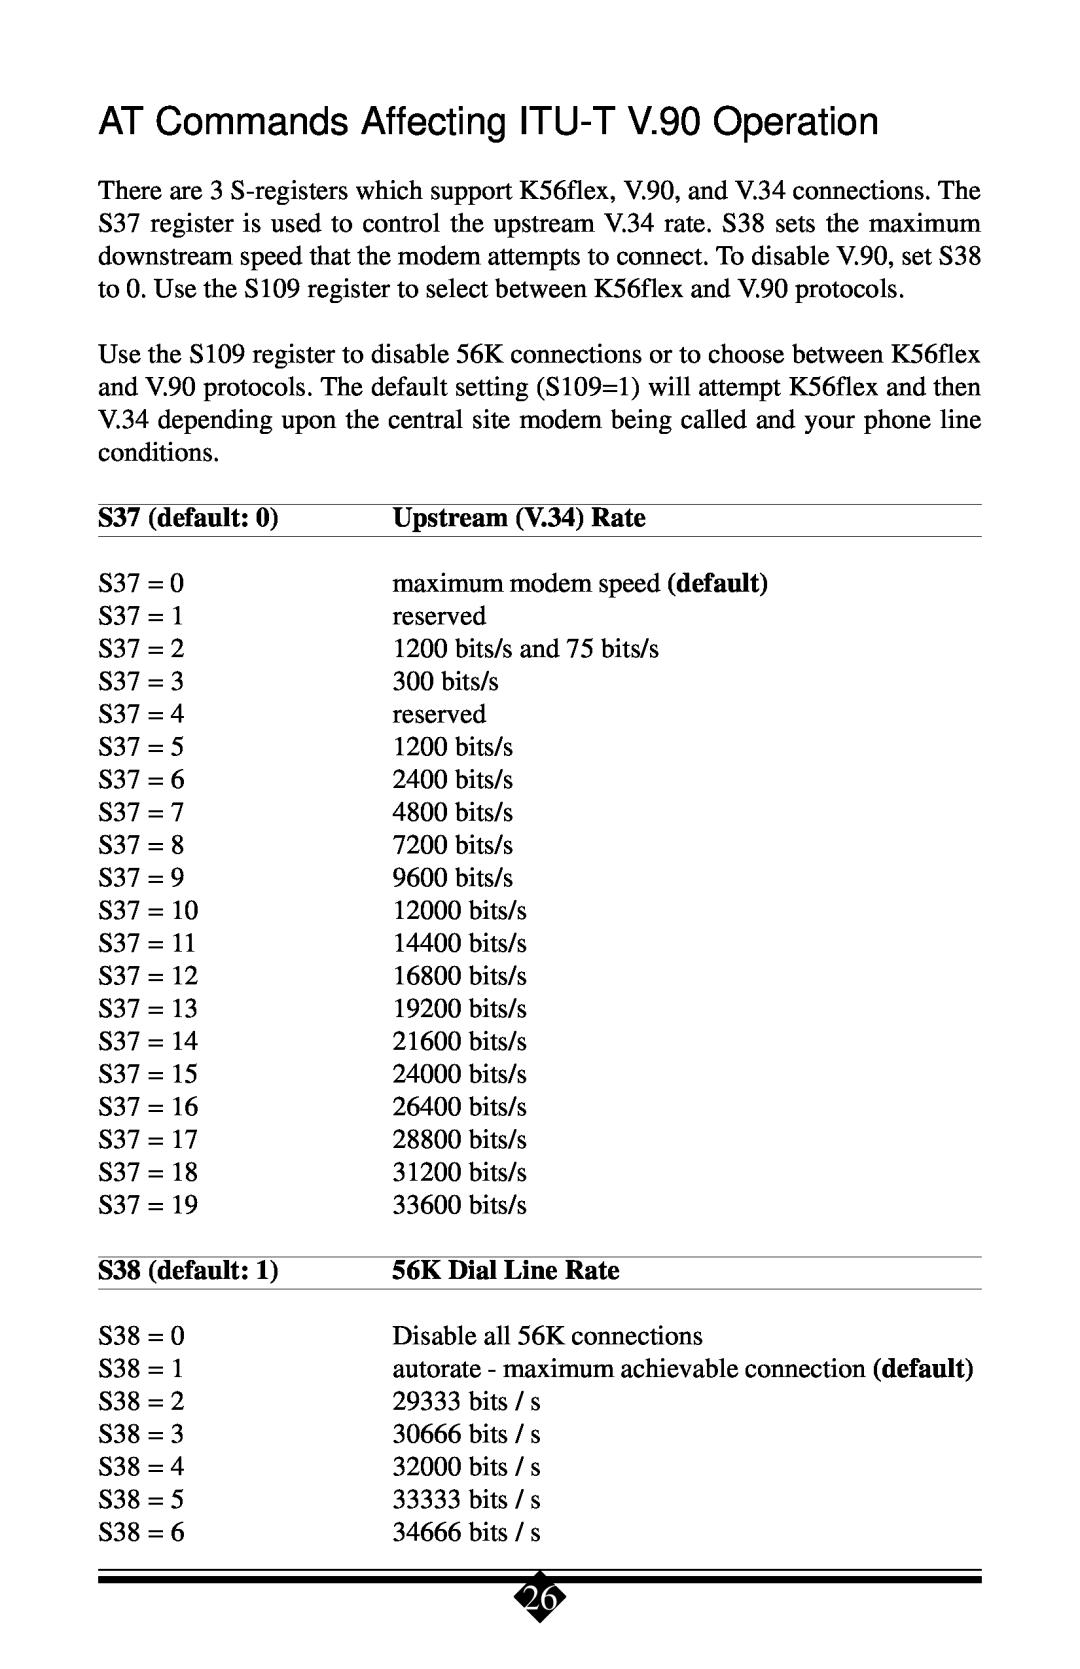 Actiontec electronic manual AT Commands Affecting ITU-T V.90 Operation, default, Upstream V.34 Rate, 56K Dial Line Rate 